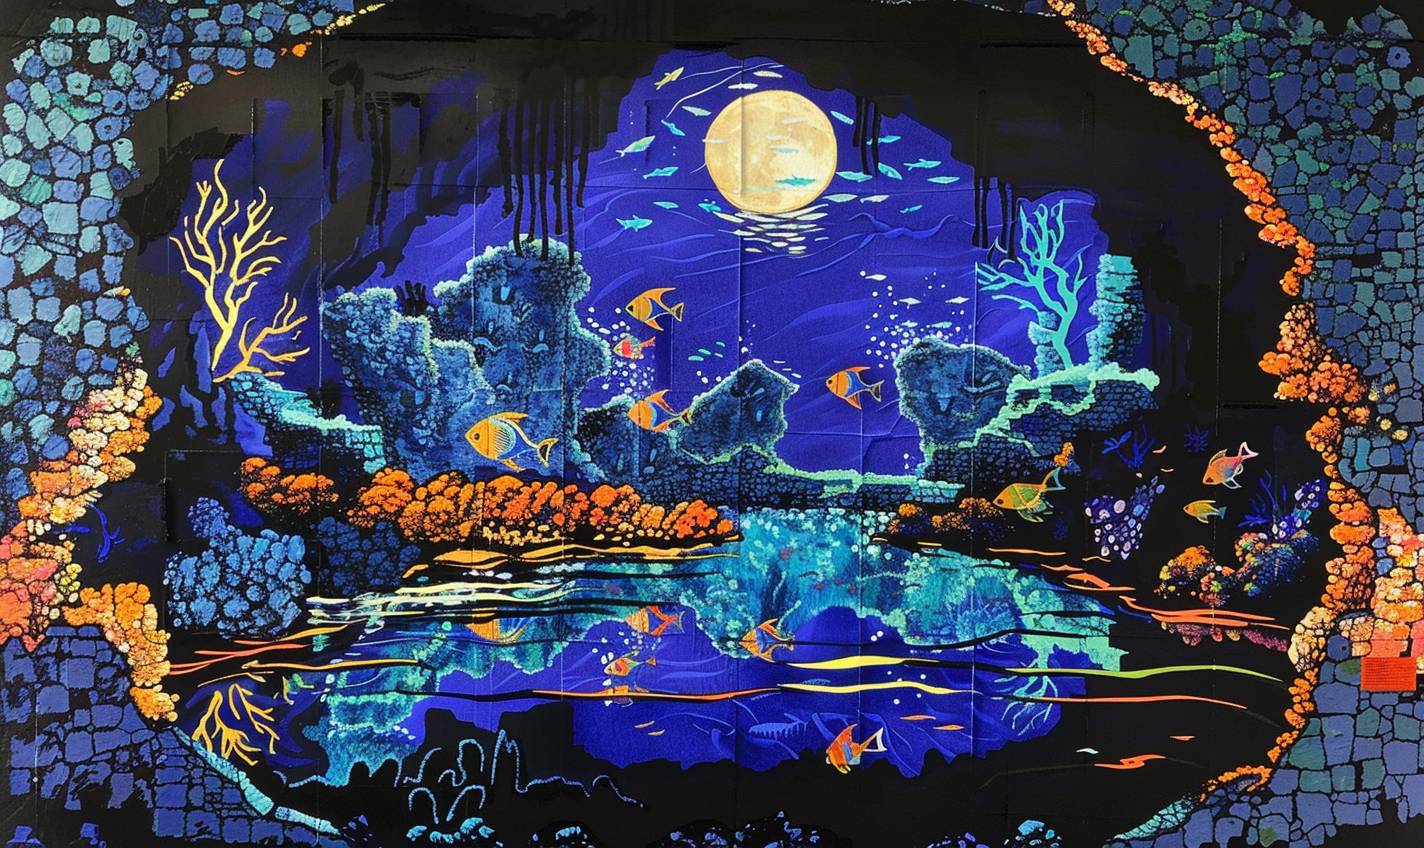 In the style of Patrick Caulfield, underwater grotto with shimmering mermaids